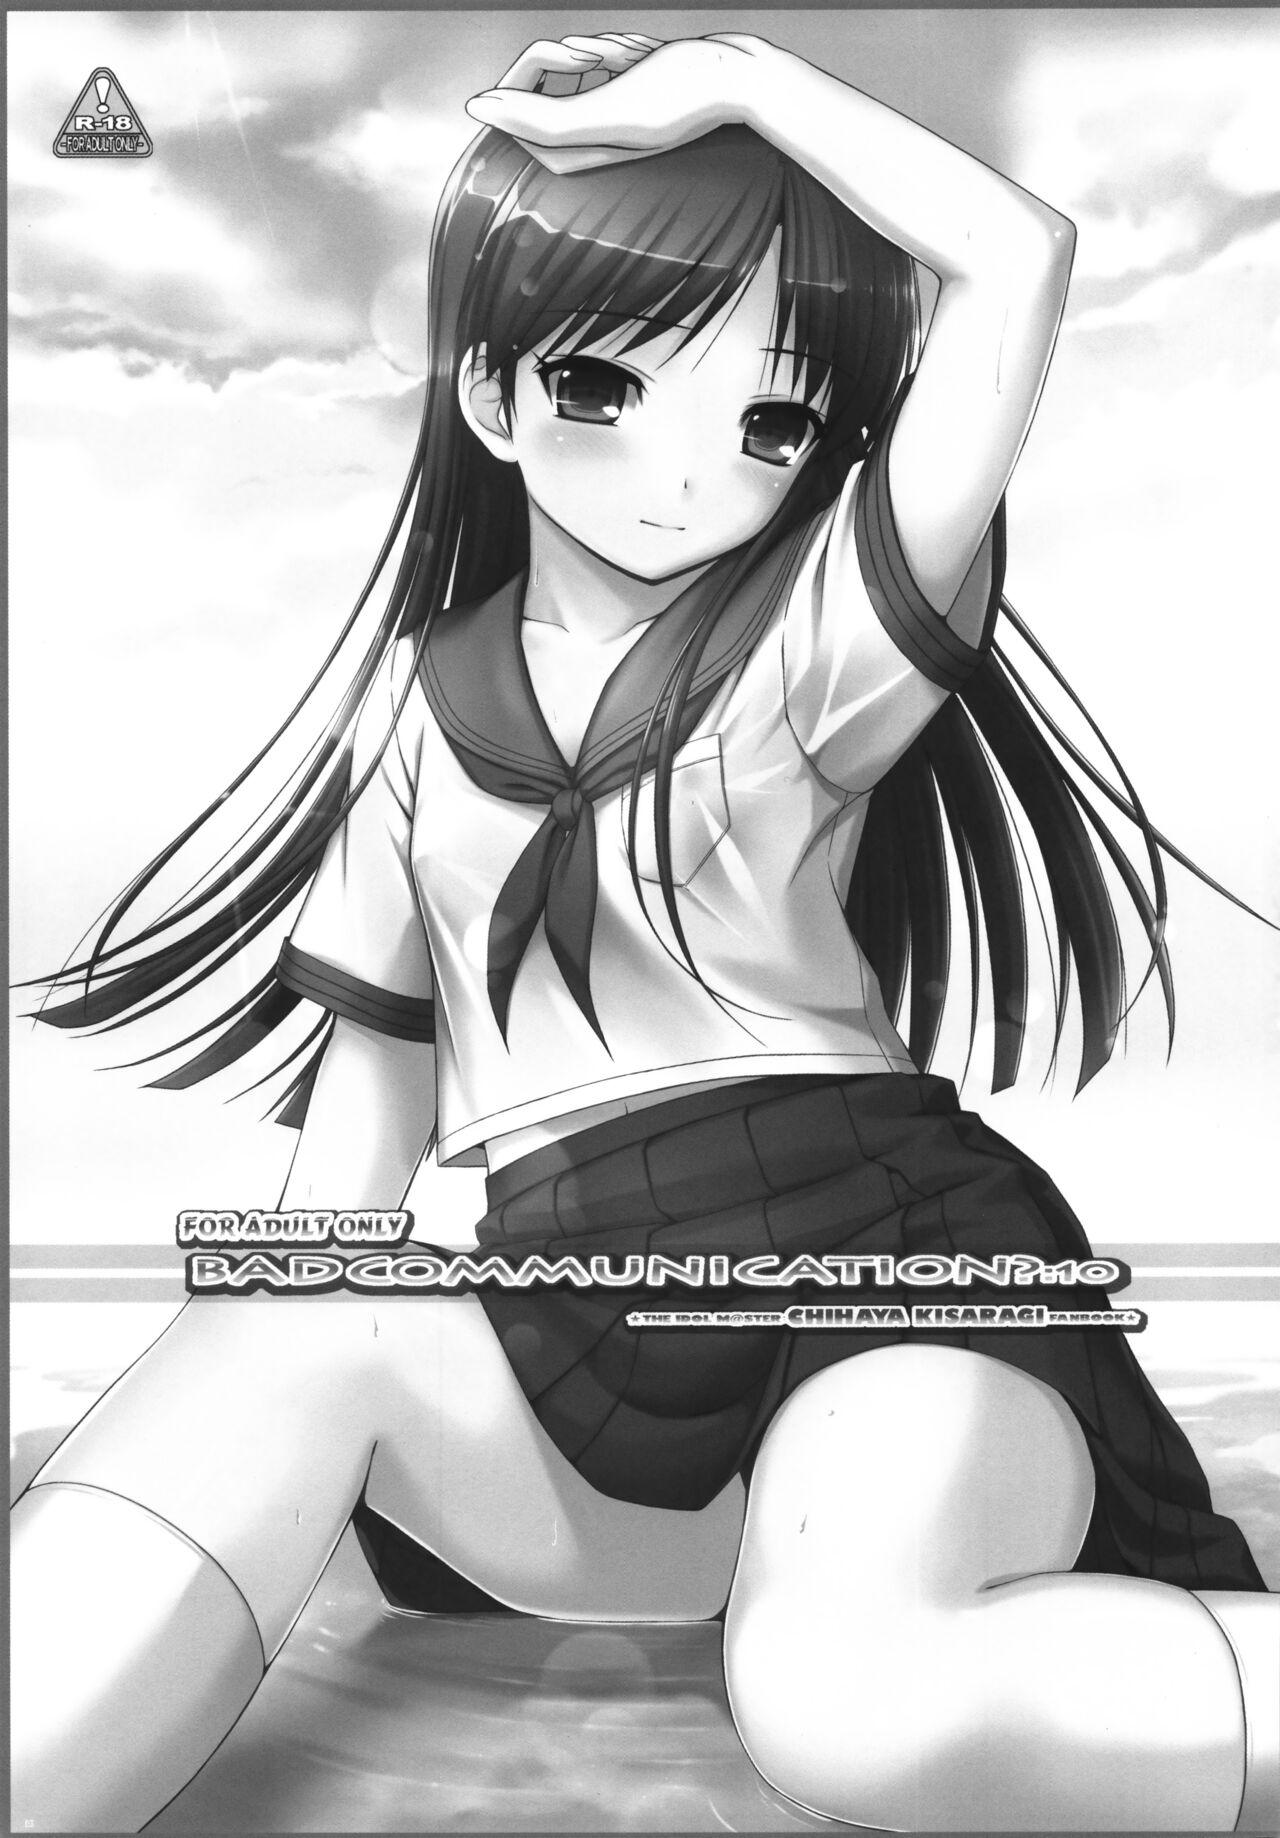 Chaturbate BAD COMMUNICATION? 10 - The idolmaster Bwc - Picture 2